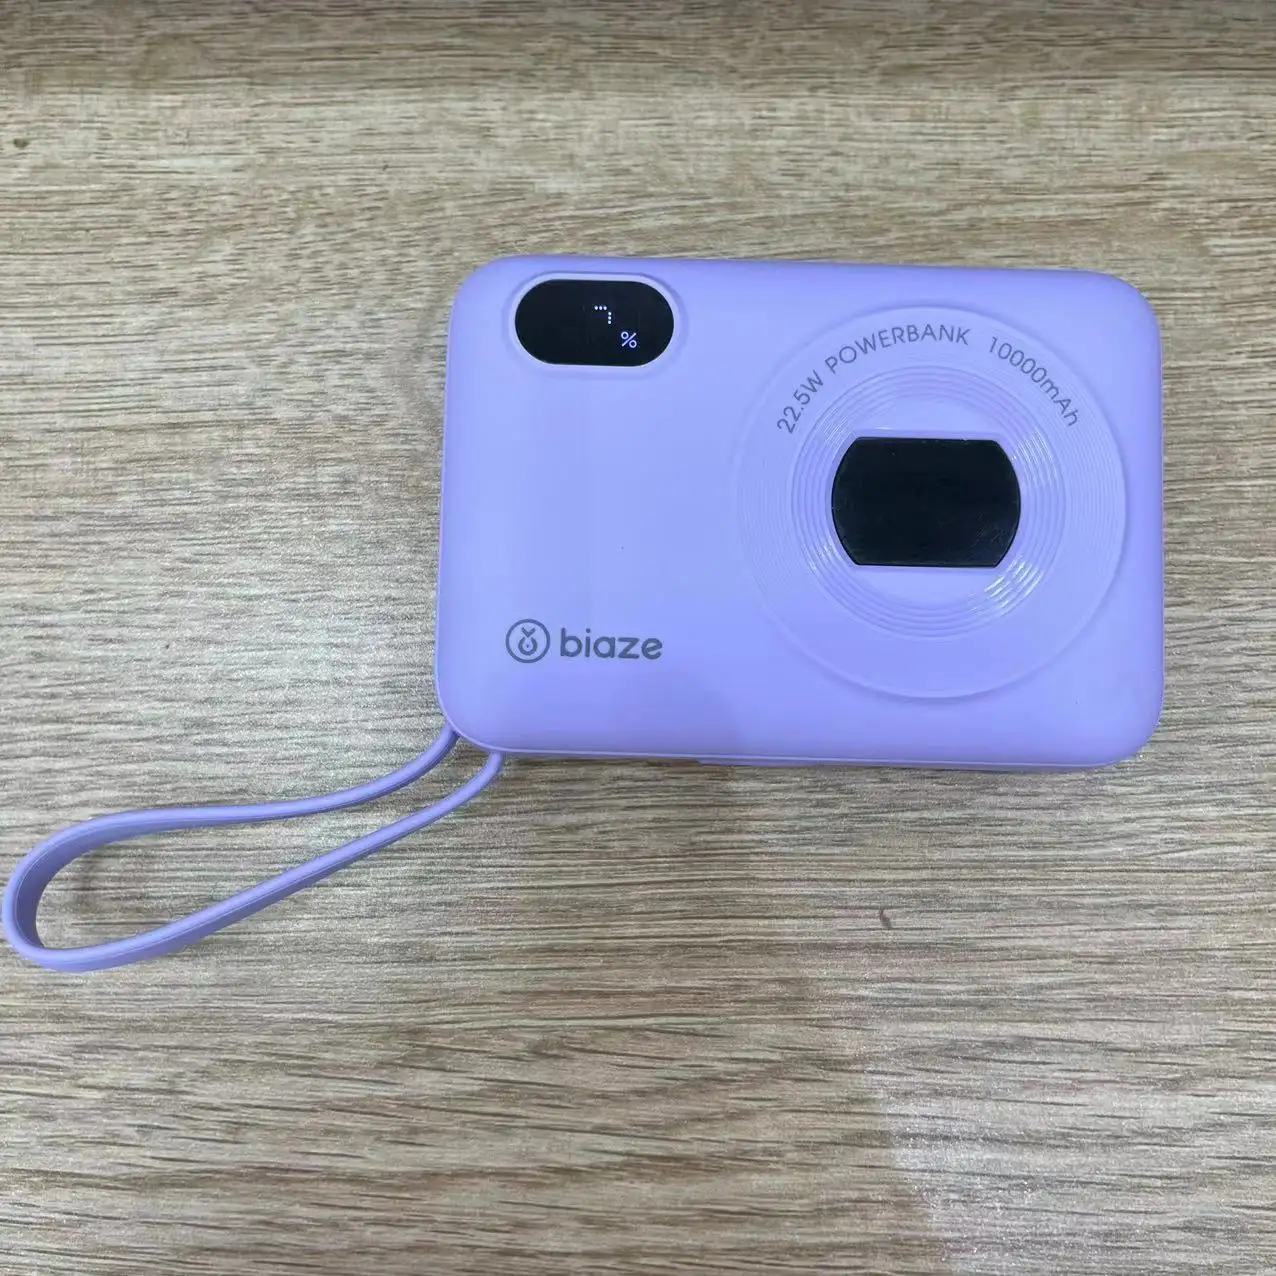 Cute Camera Like Power Bank 10000mAh with Cables and Digital Display